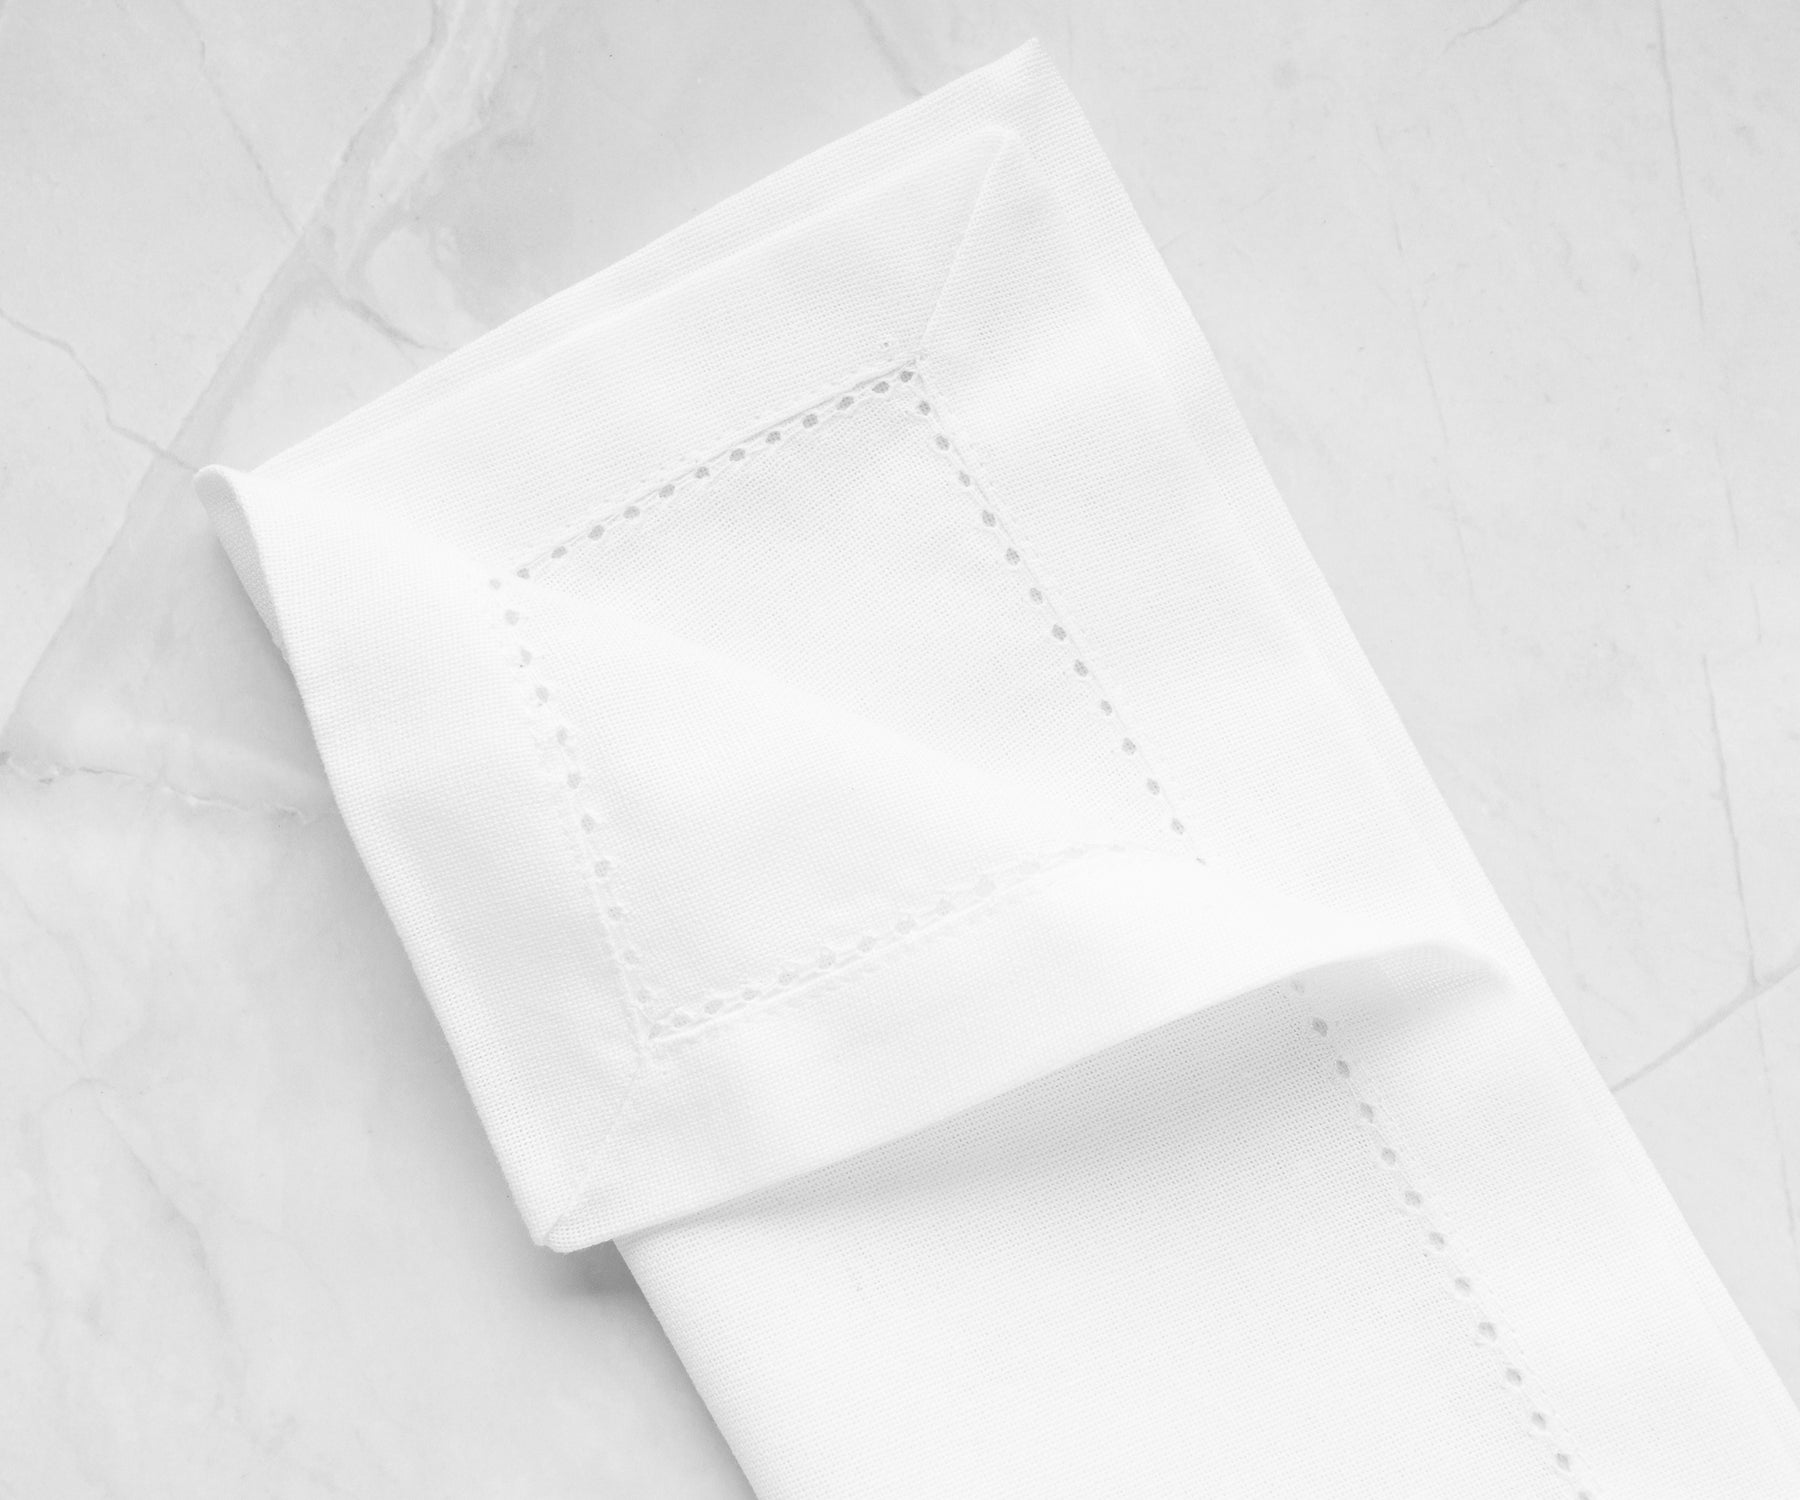 white hemstitch napkins can be tailored to suit different table settings and occasions, ensuring a perfect fit for any dining situation.